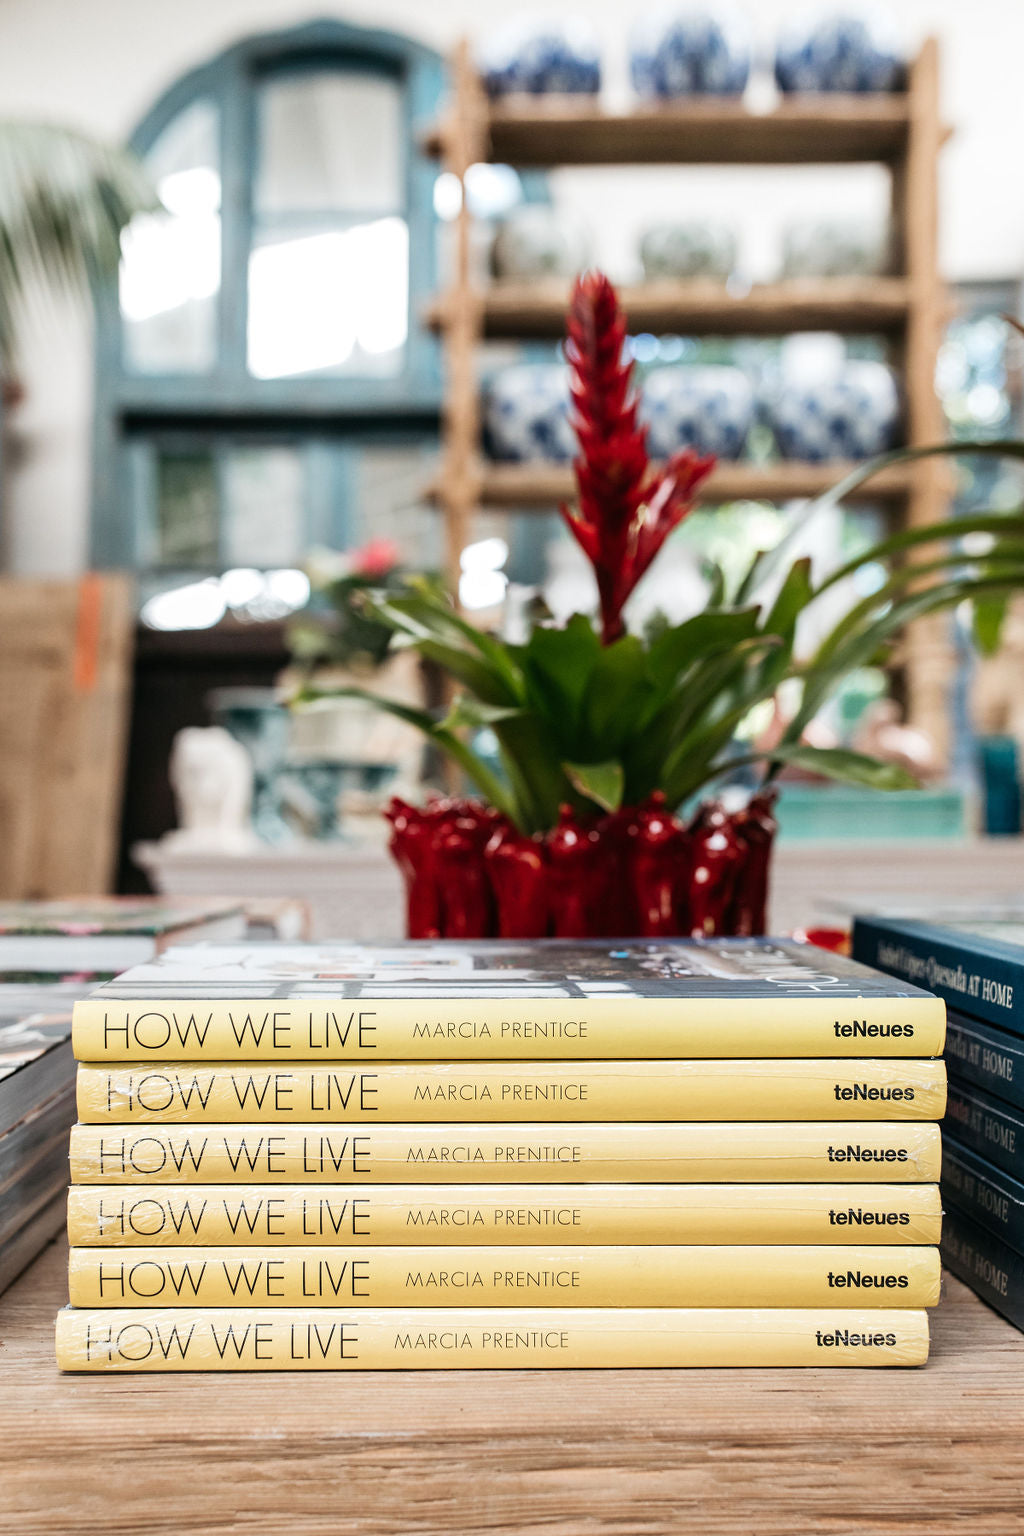 How We Live by Marcia Prentice